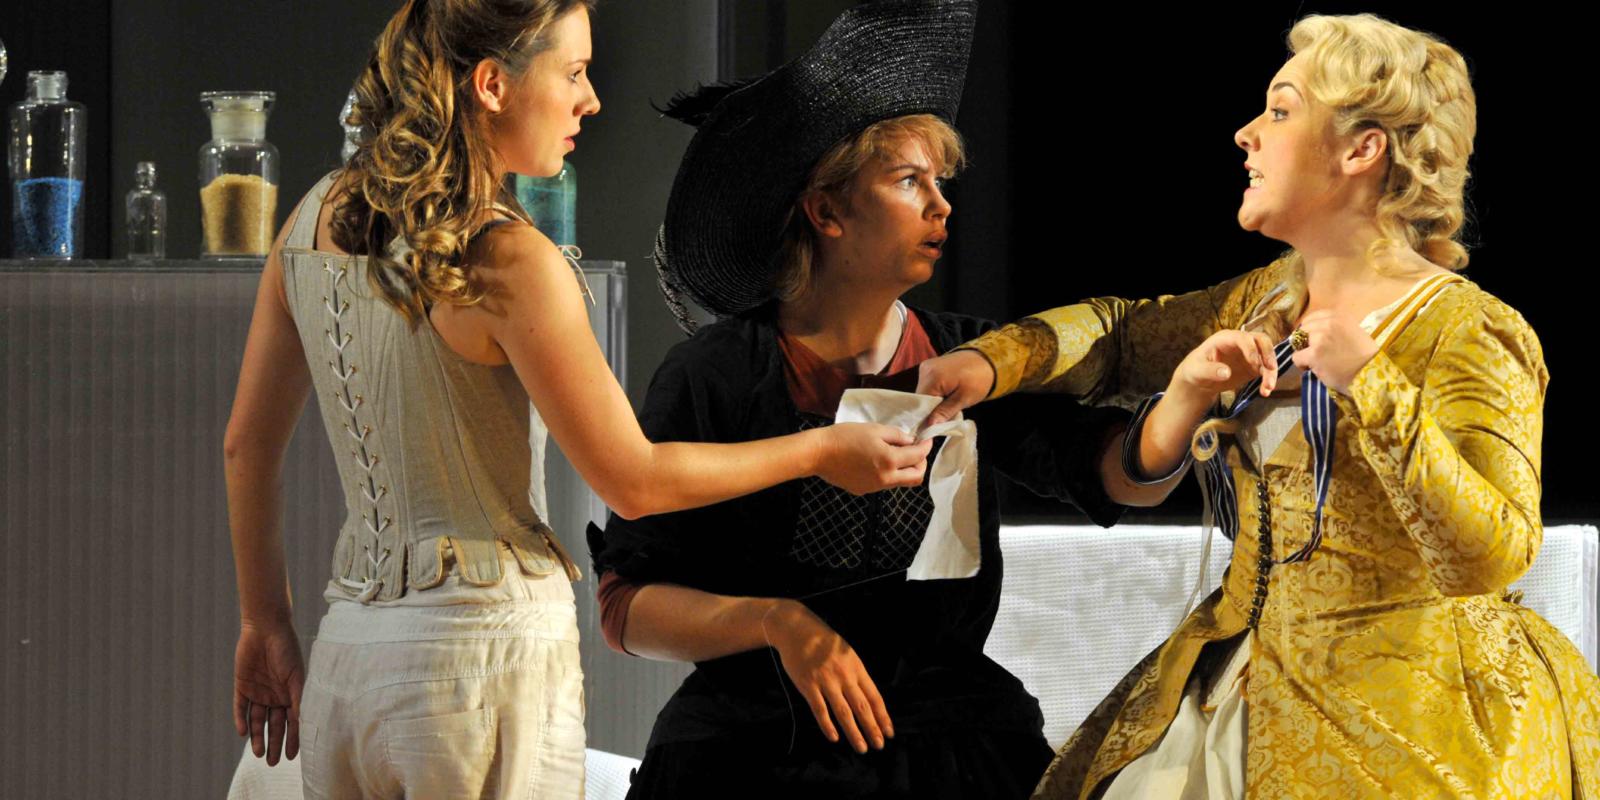 An image of Mary Bevan, Samantha Price, Sarah Jane Brandon in Fiona Shaw's 2014 production of The Marriage of Figaro